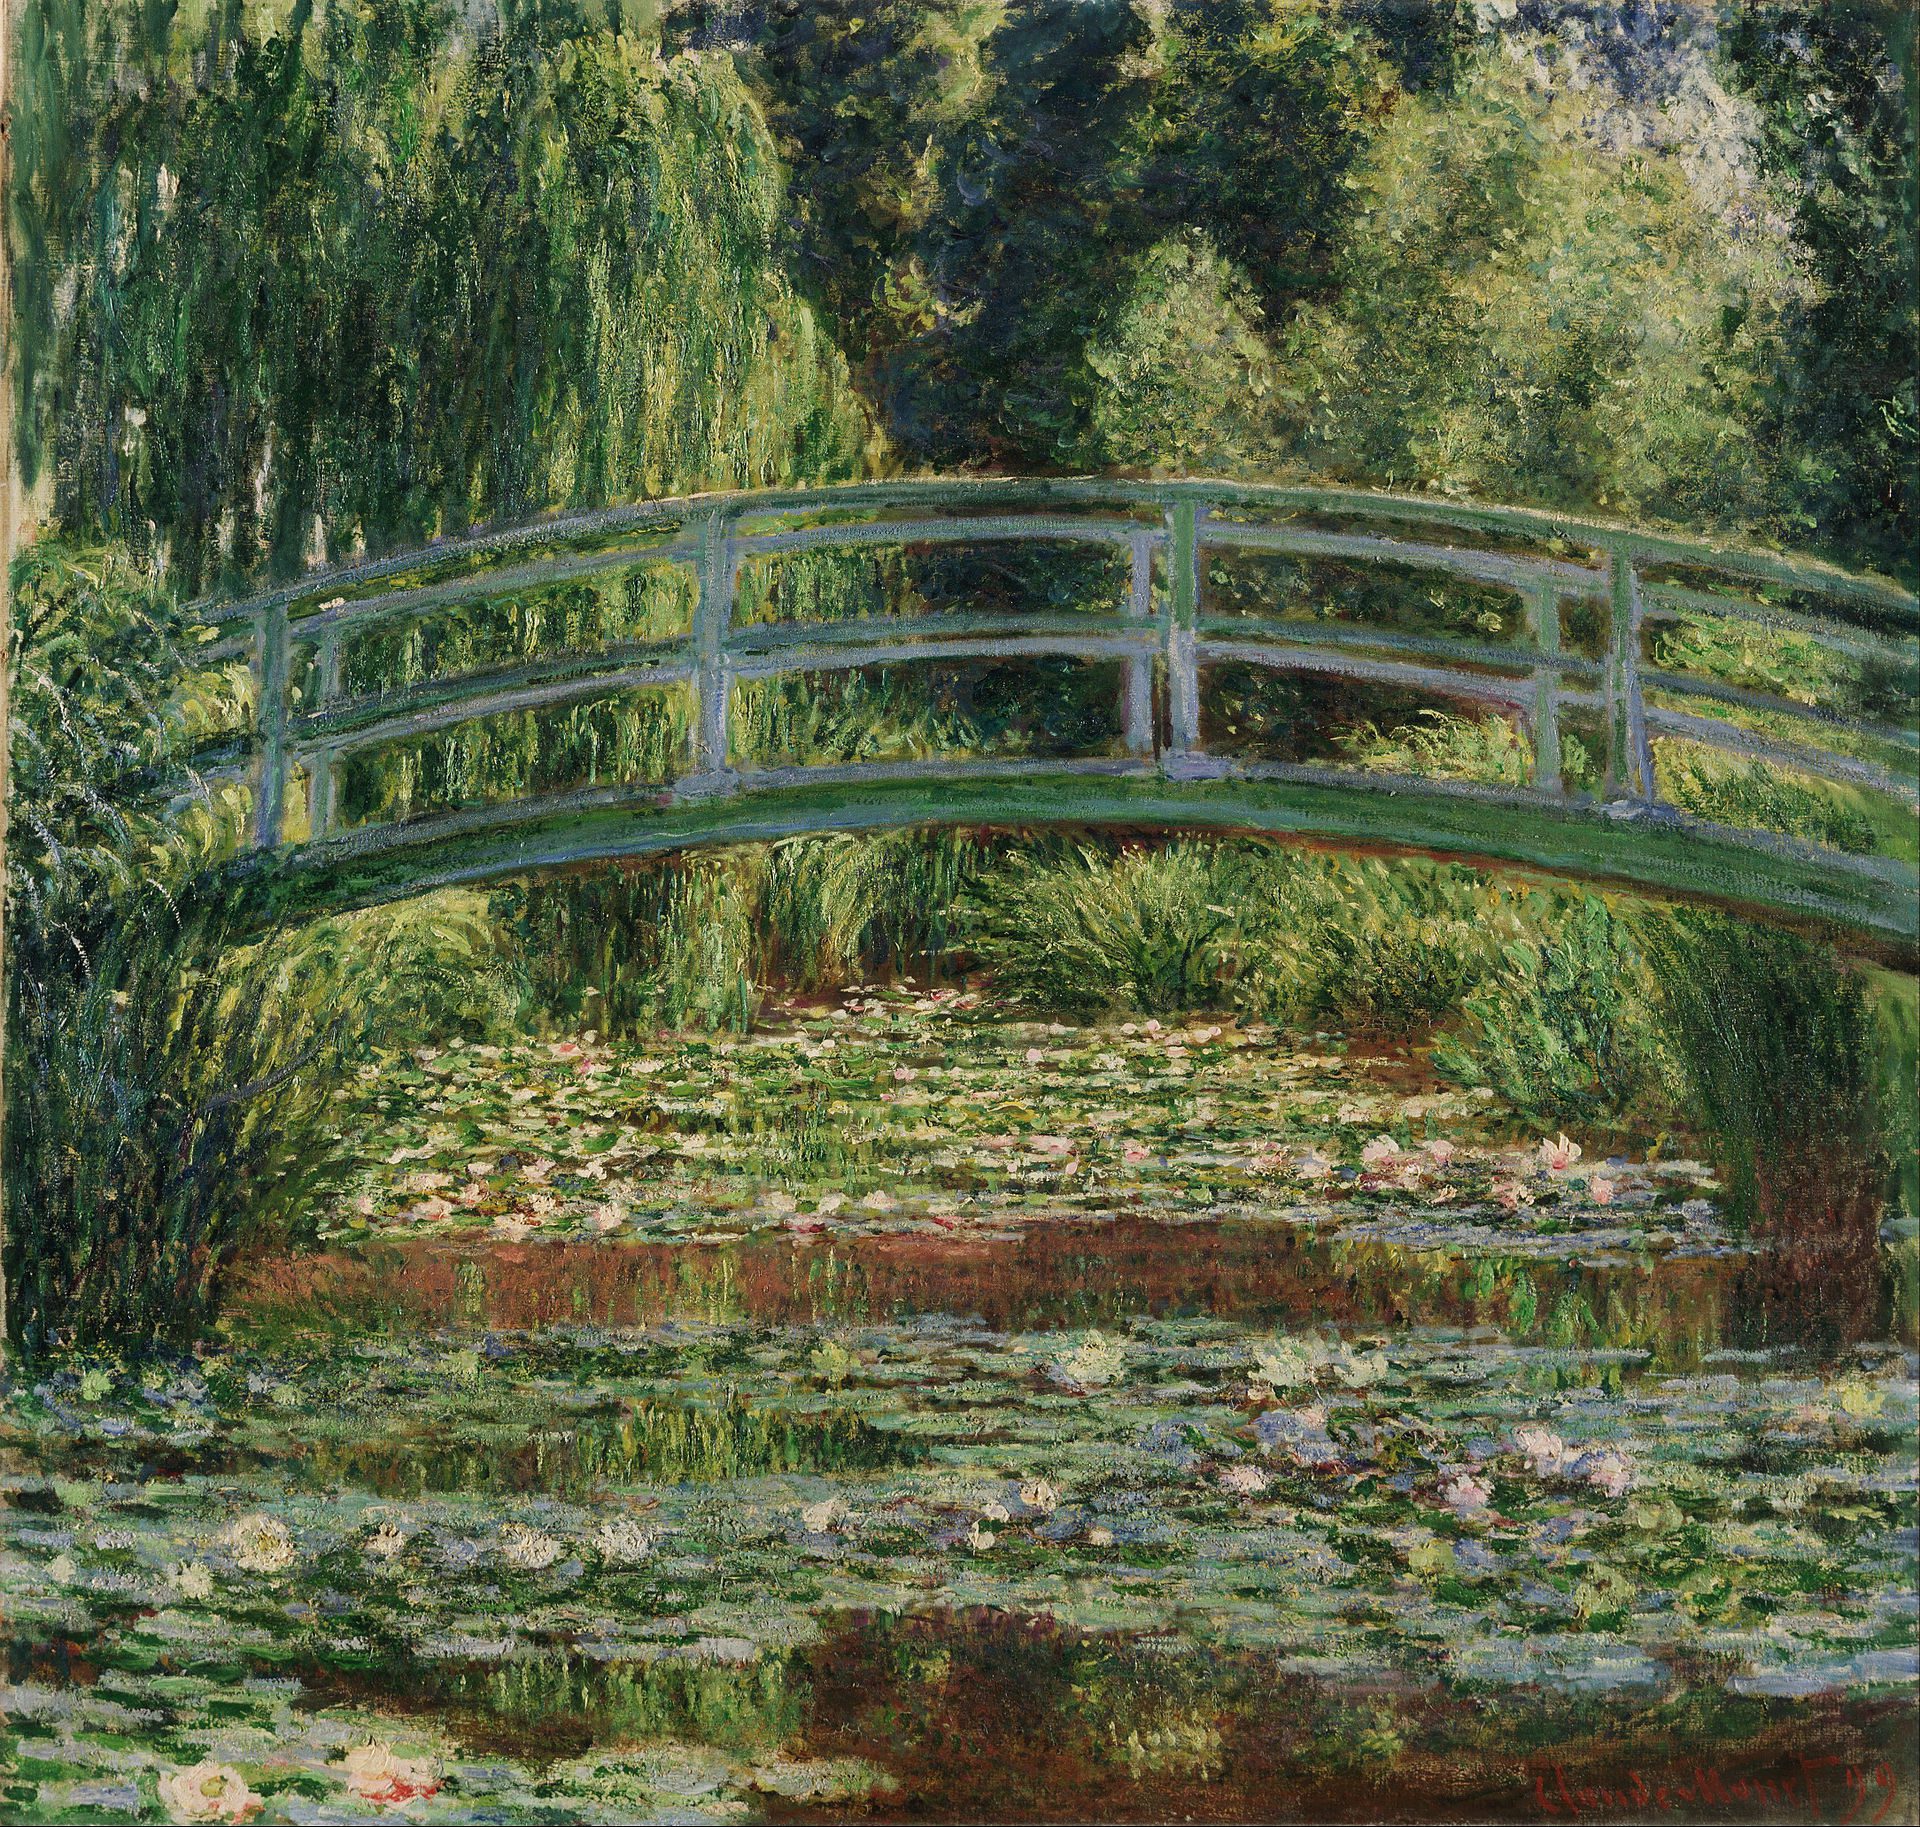 The work of Claude Monet and the history of his life